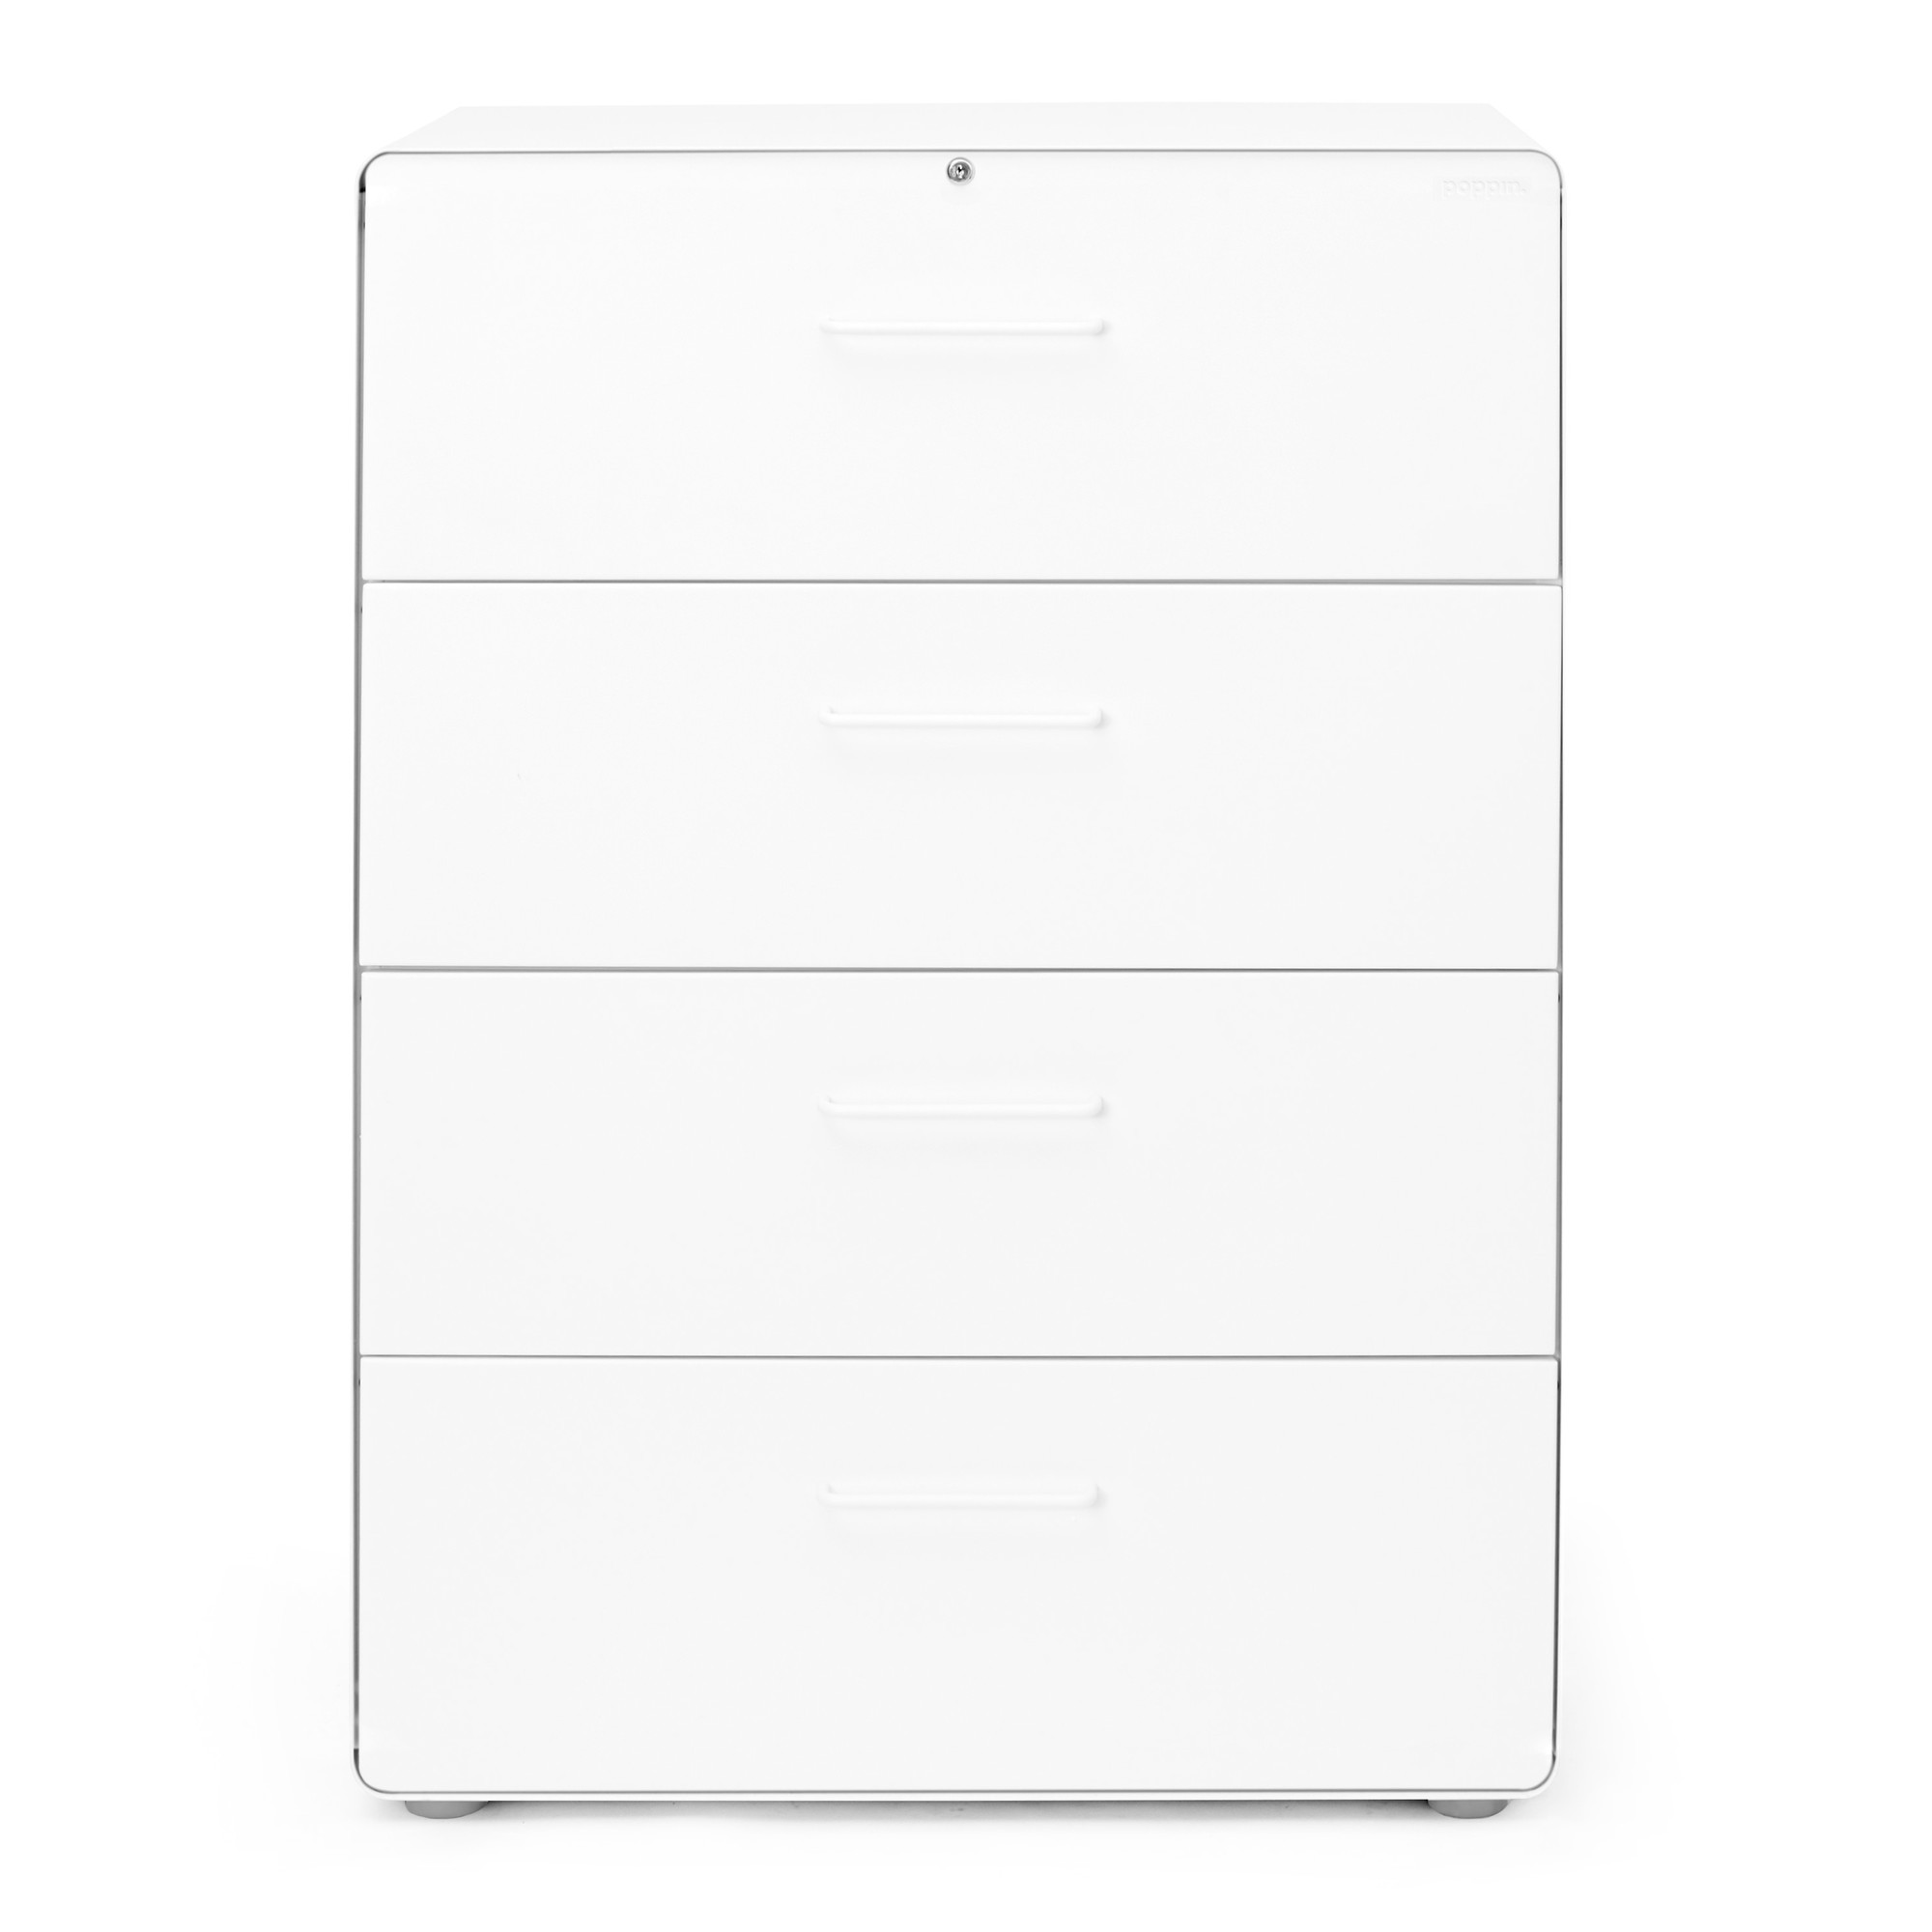 White Stow 4-Drawer Lateral File Cabinet,White,hi-res